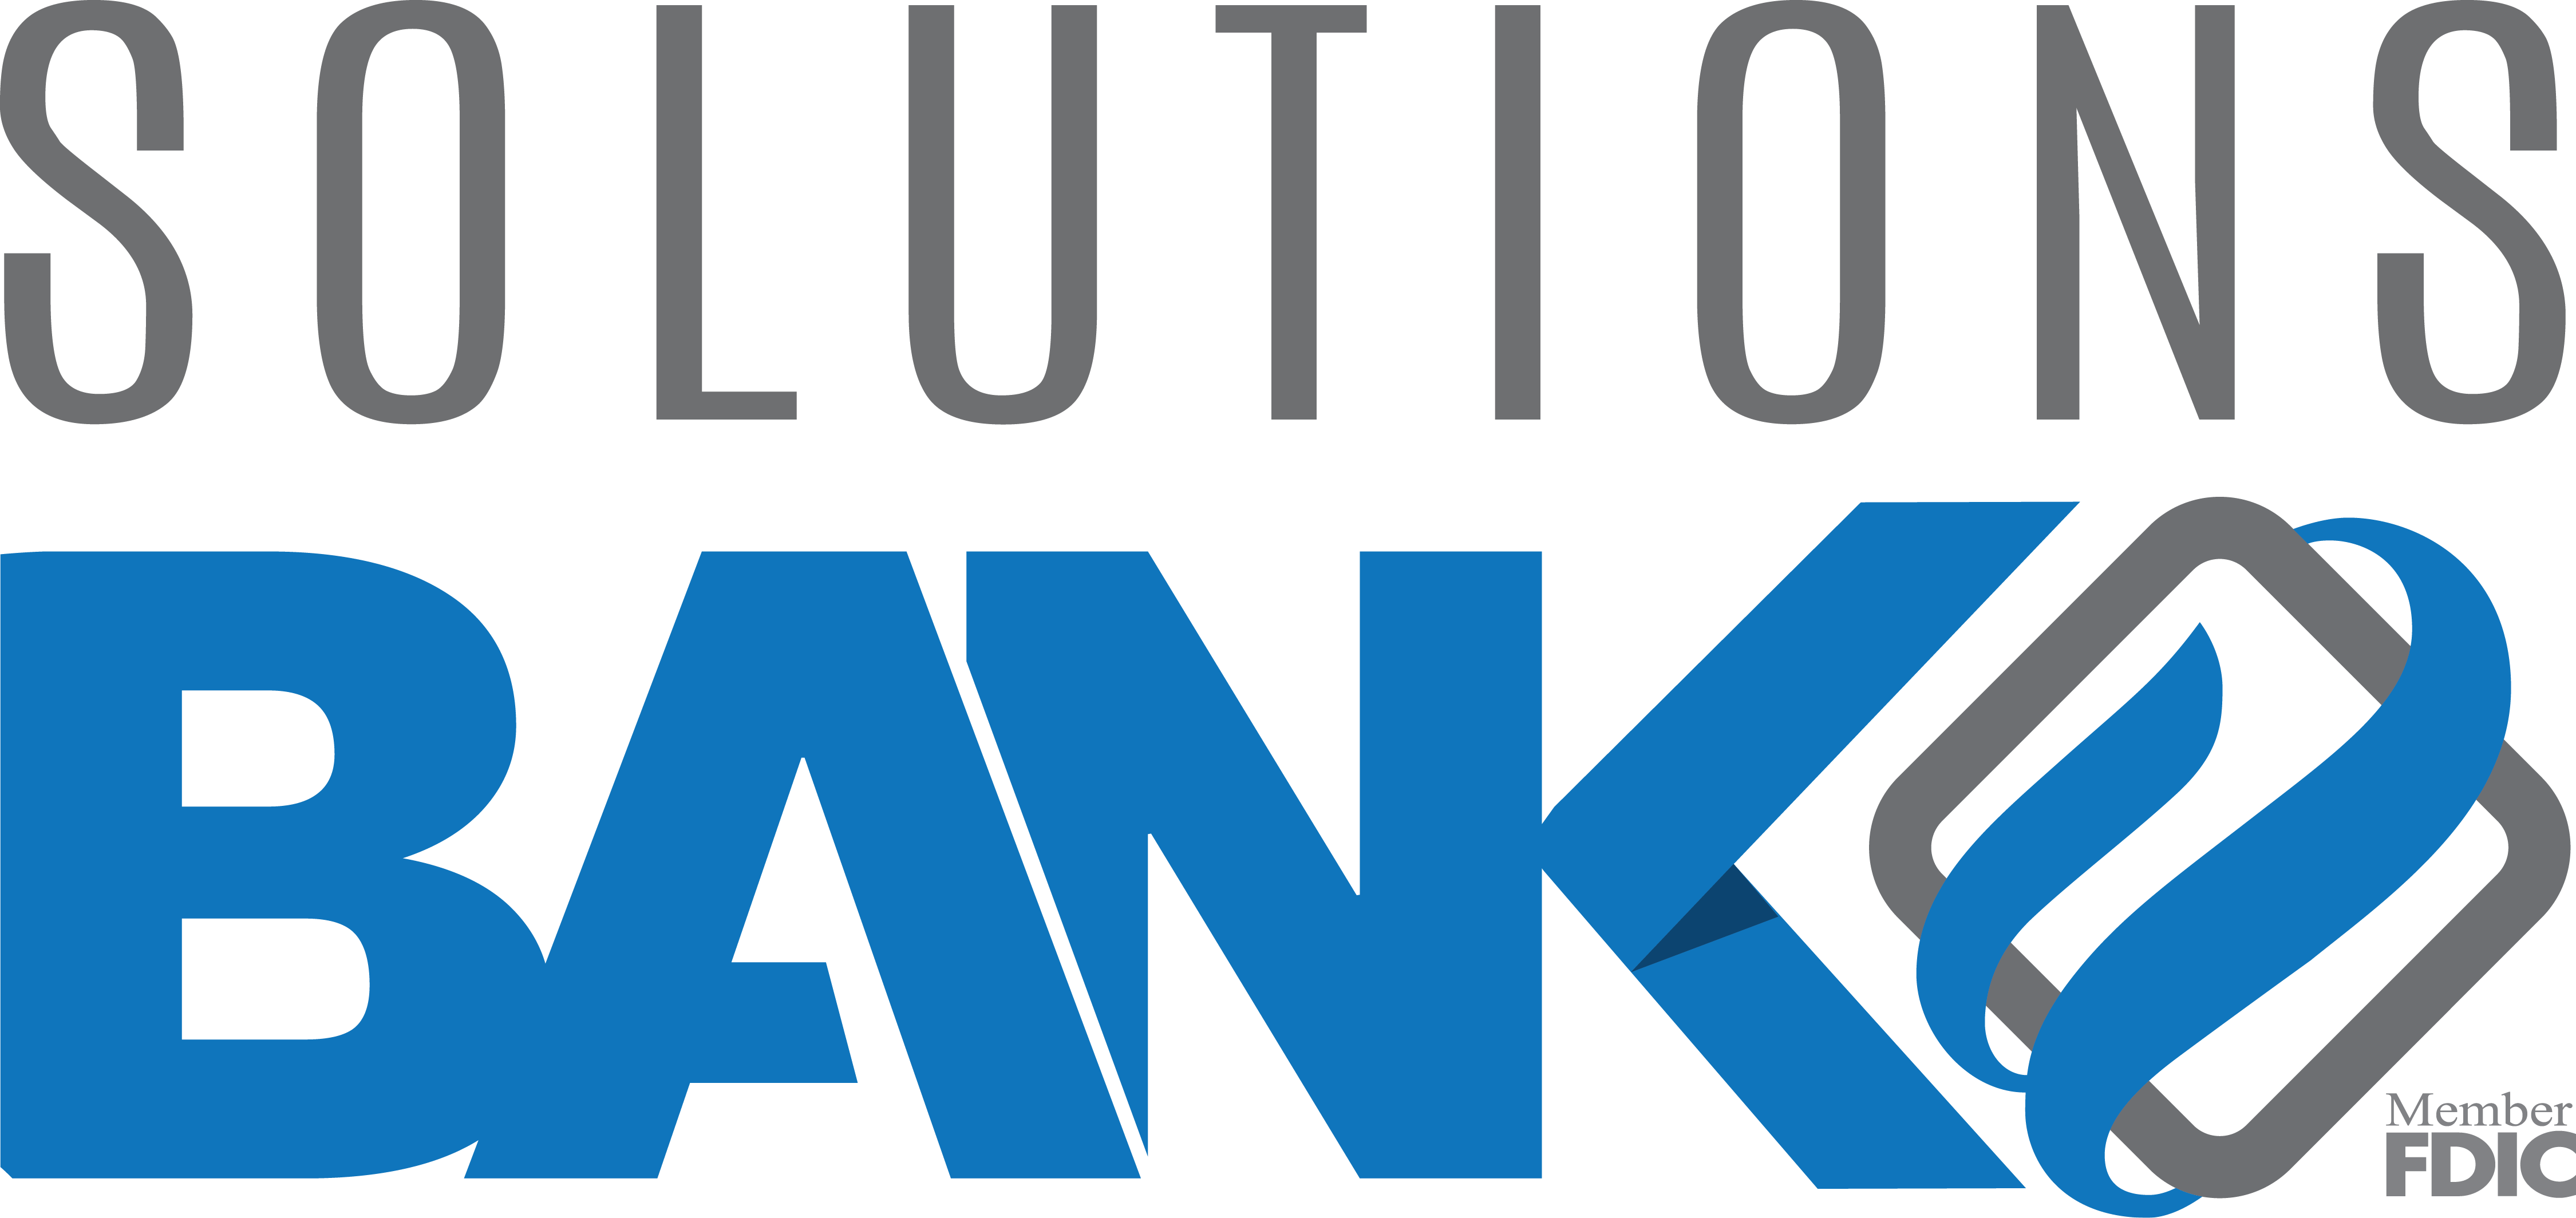 Solutions Bank